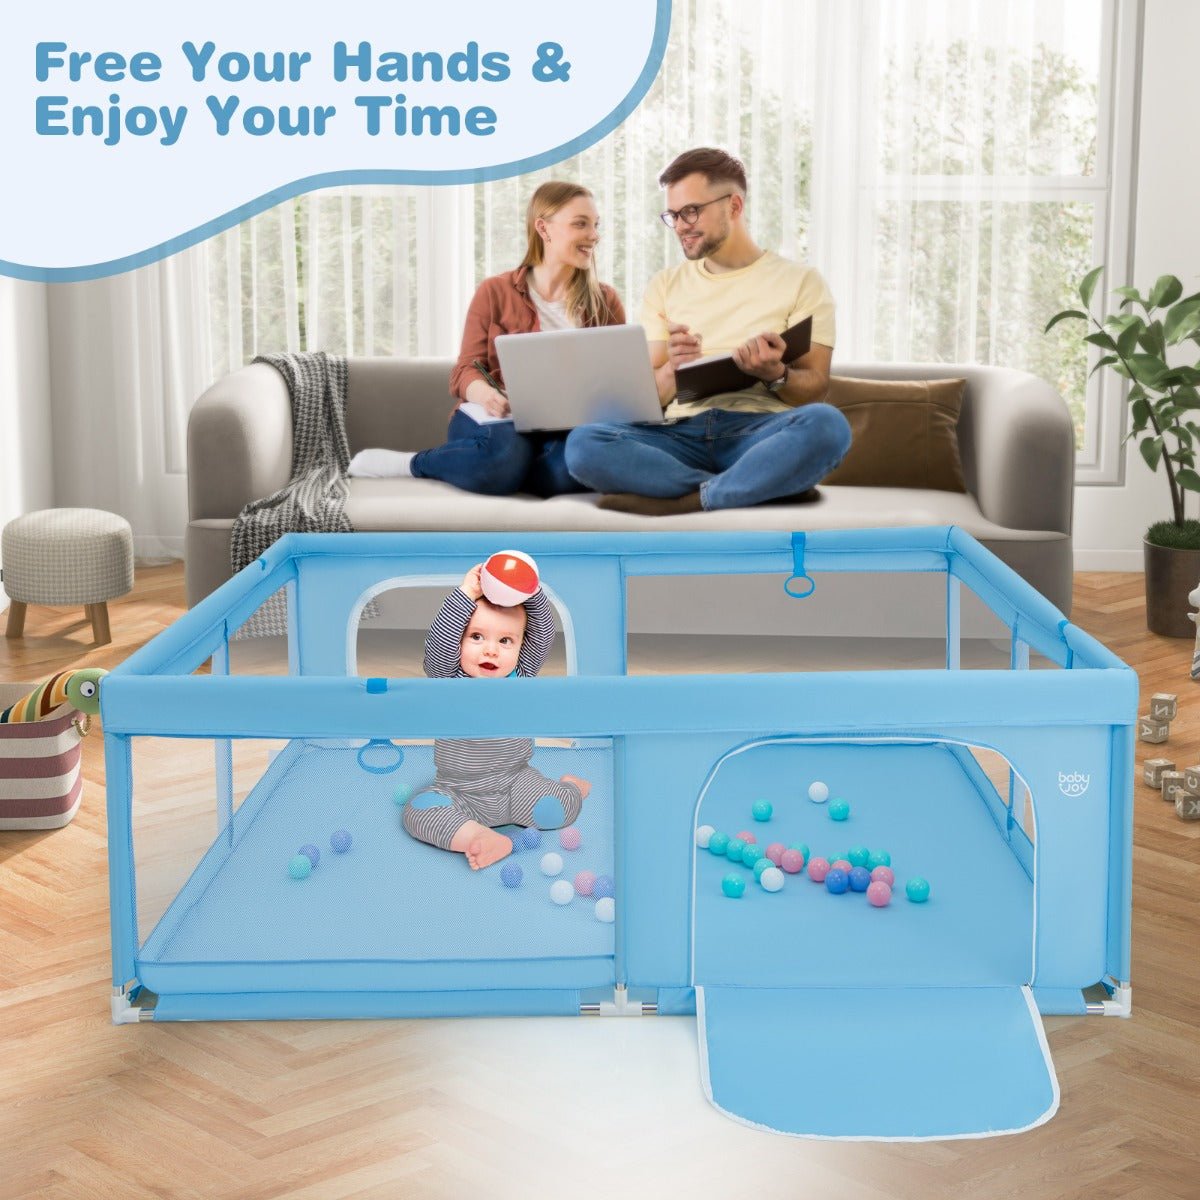 Safe and Exciting Play Pen for Little Ones